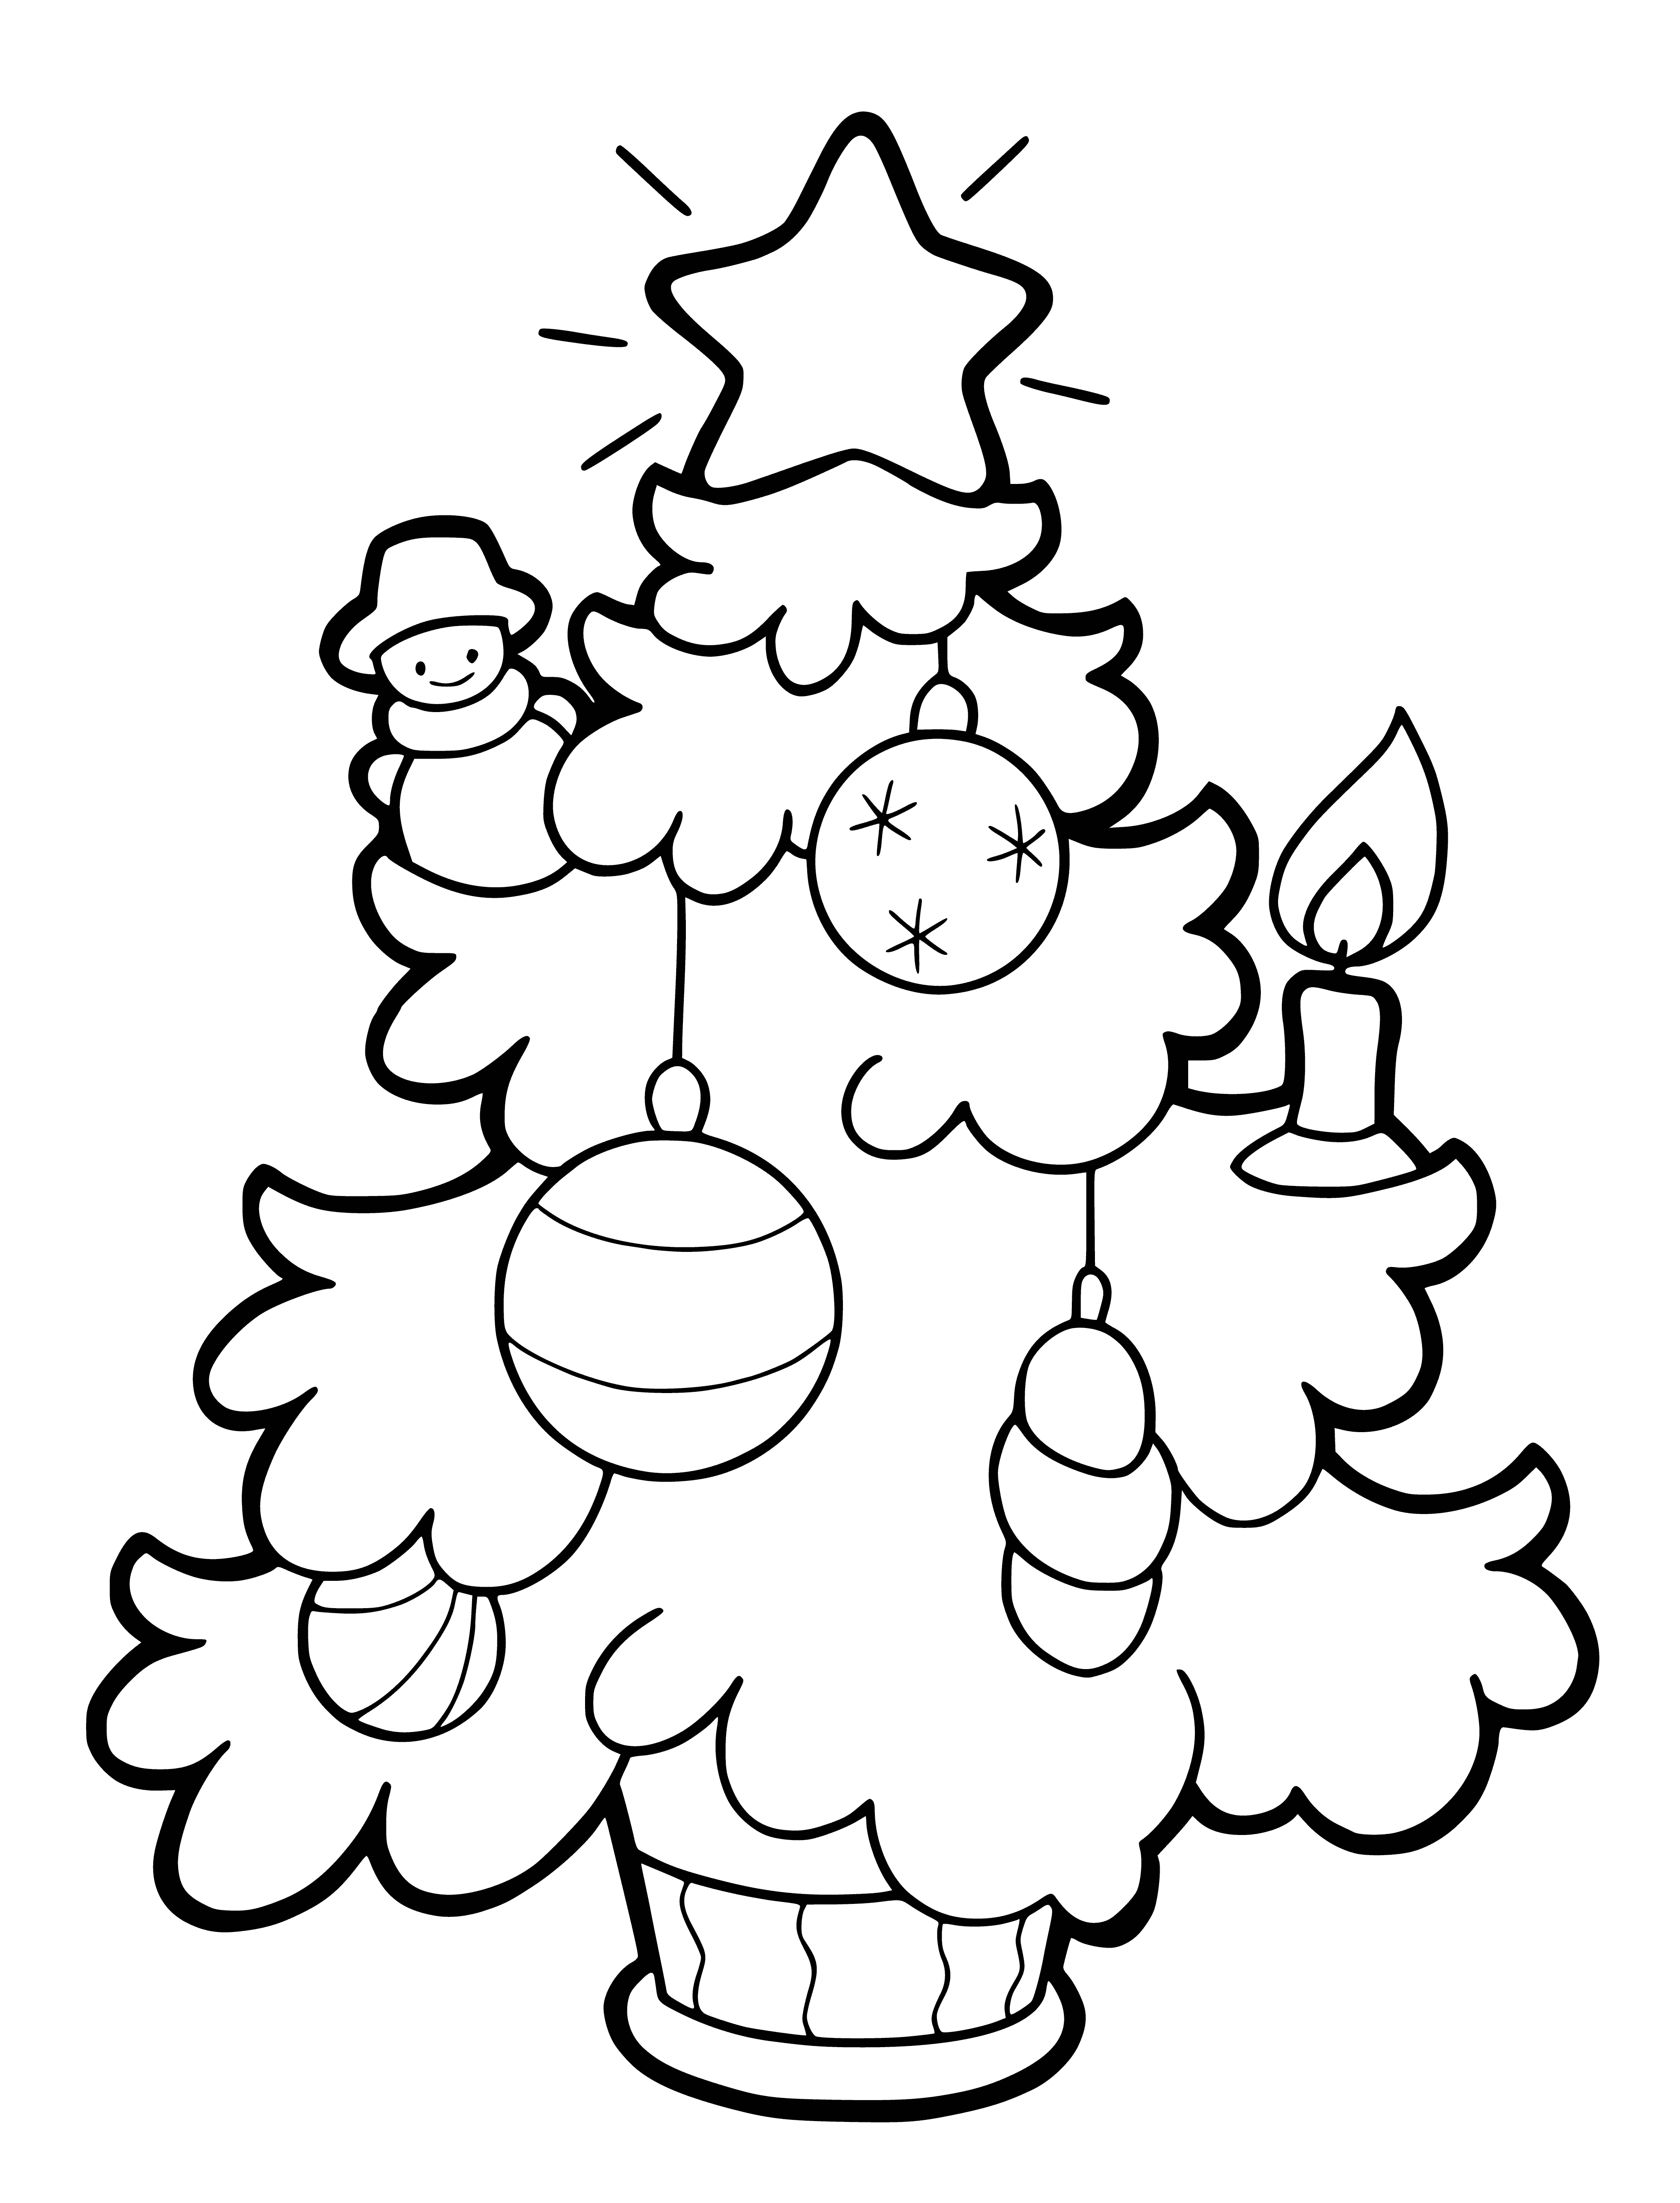 Colorful Christmas tree with ornaments, garland, & star on top, with presents underneath. #ChristmasDecoration #ColoringPage